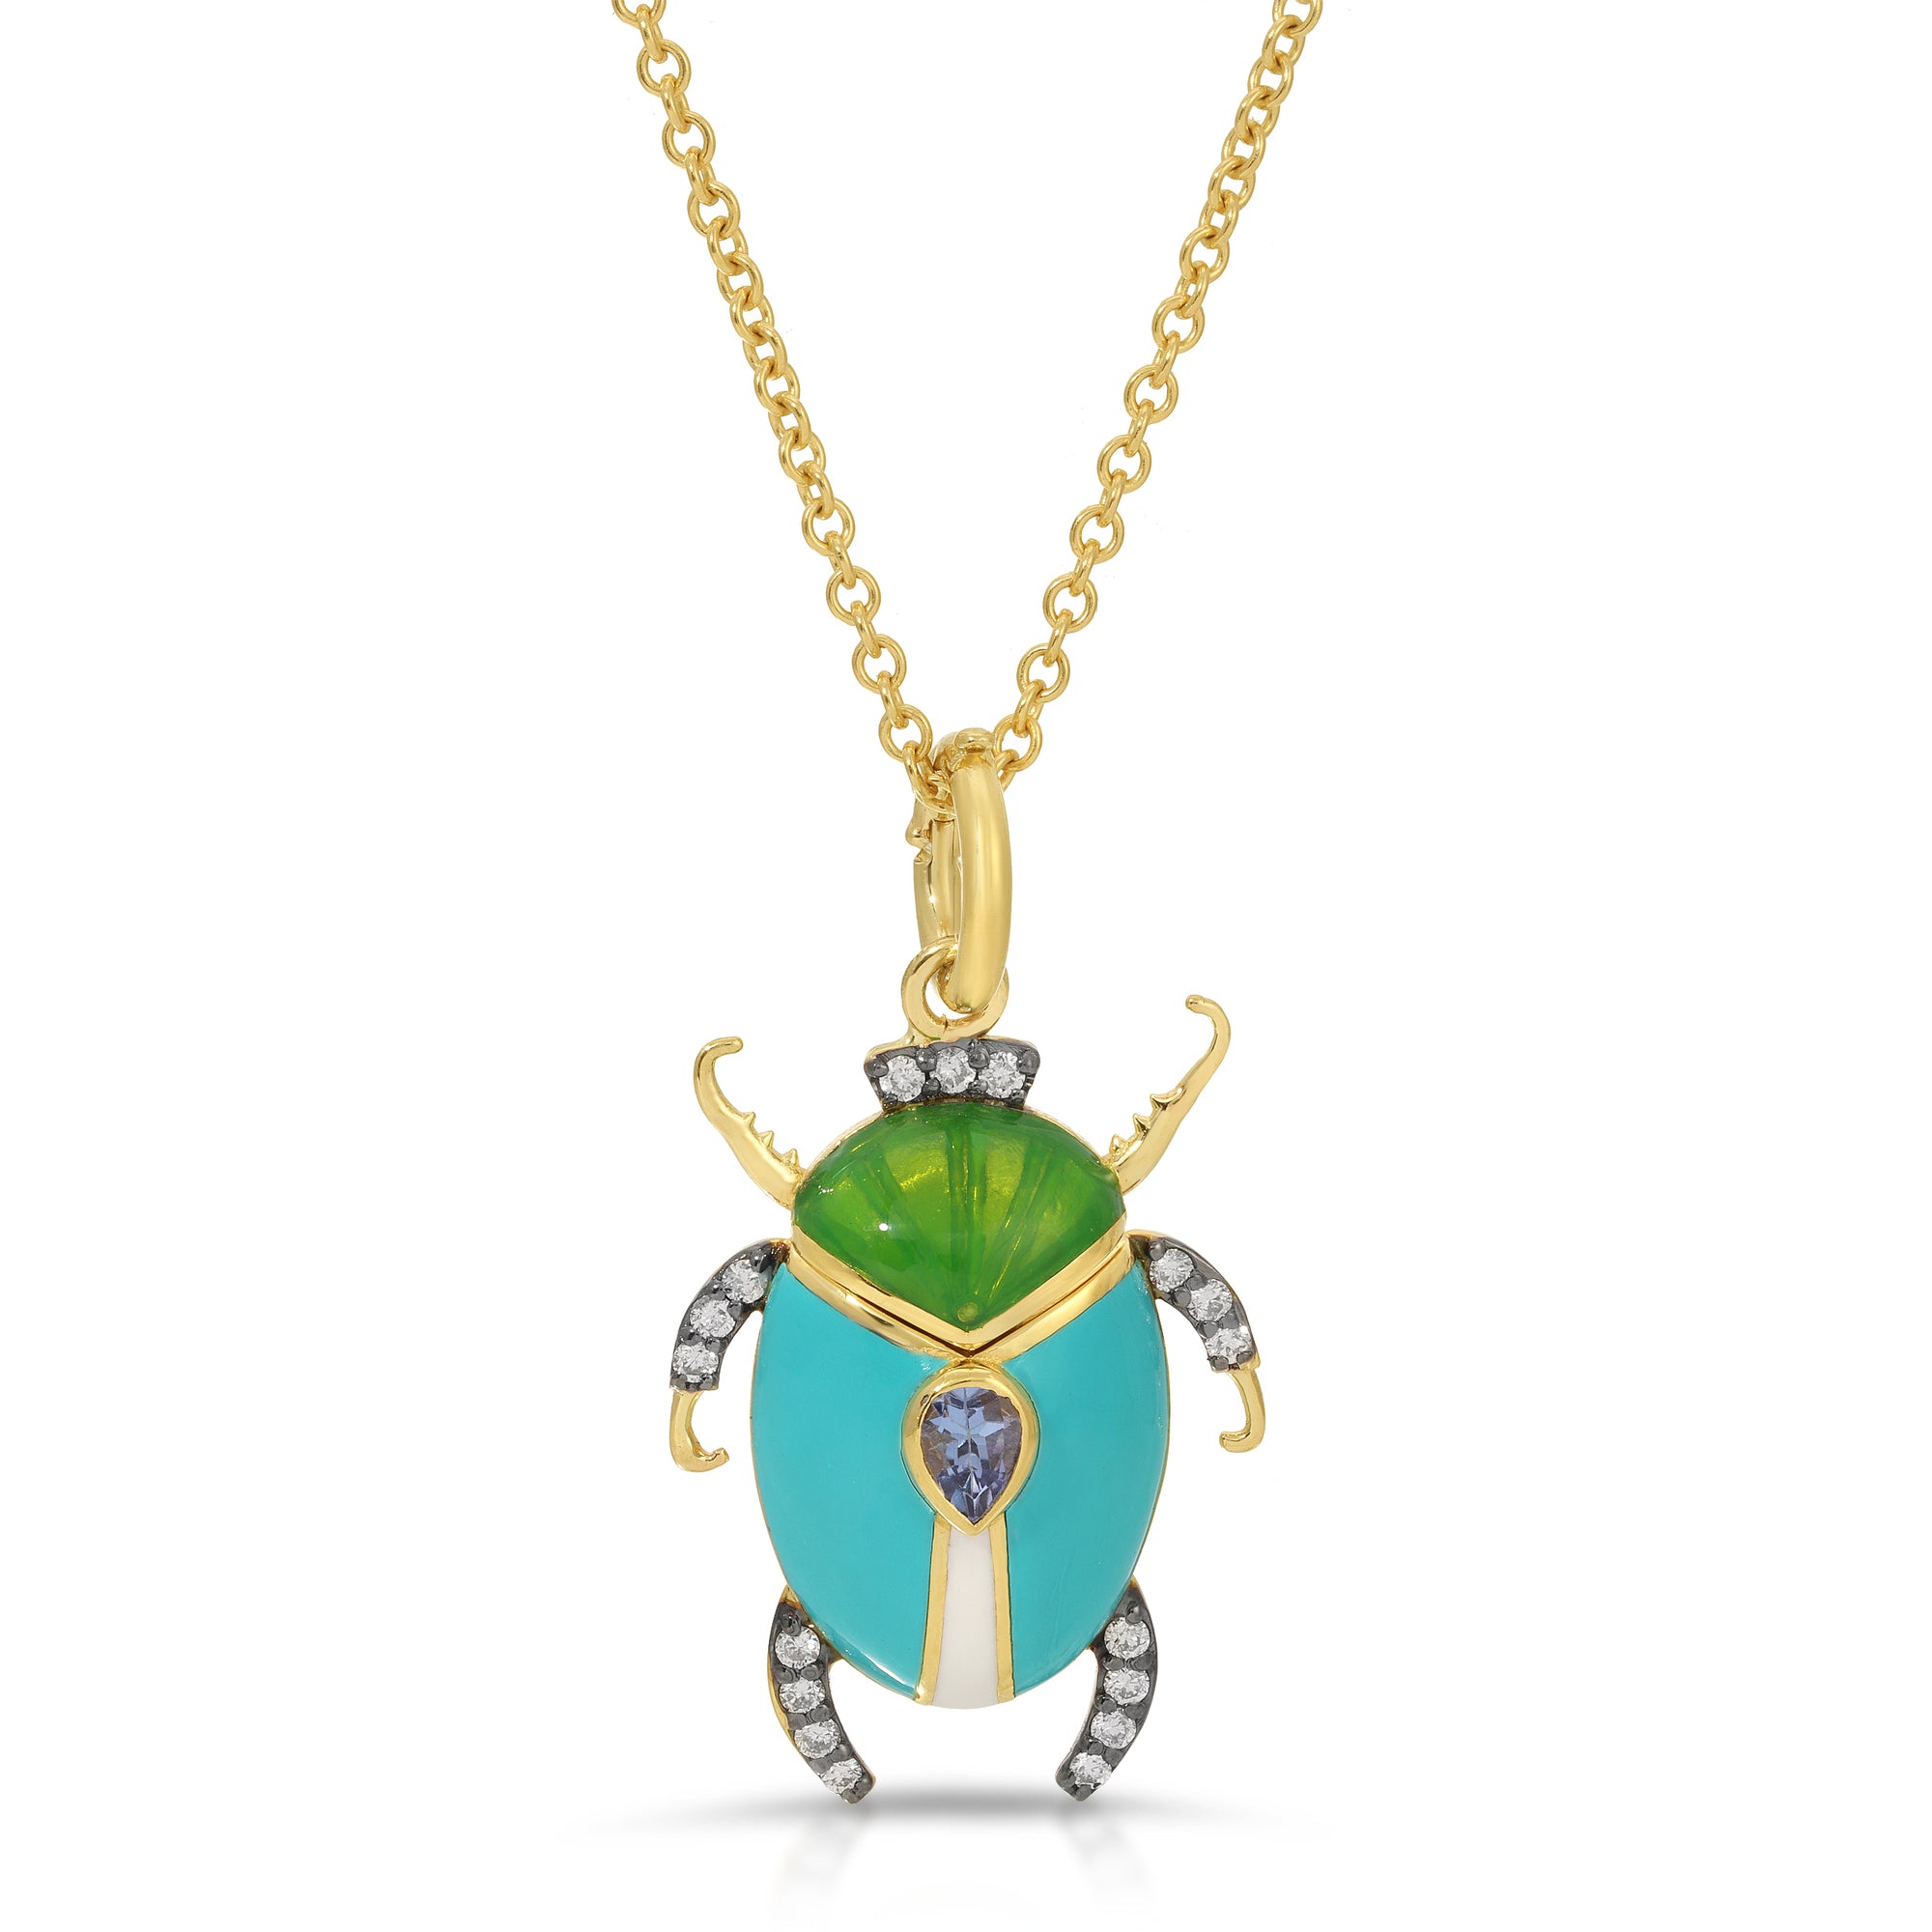 Sapphire Enamel Beetle Necklace by Lord Jewelry available at Talisman Collection Fine Jewelers in El Dorado Hills, CA and online. If you're looking for a darling piece that exudes timelessness, look no further than this Sapphire Enamel Beetle Pendant Necklace. Crafted in 18k yellow gold, the charm features a beautiful enamel scarab, accented with a 0.19 cts cabochon pear sapphire and 0.14 cts of diamonds.